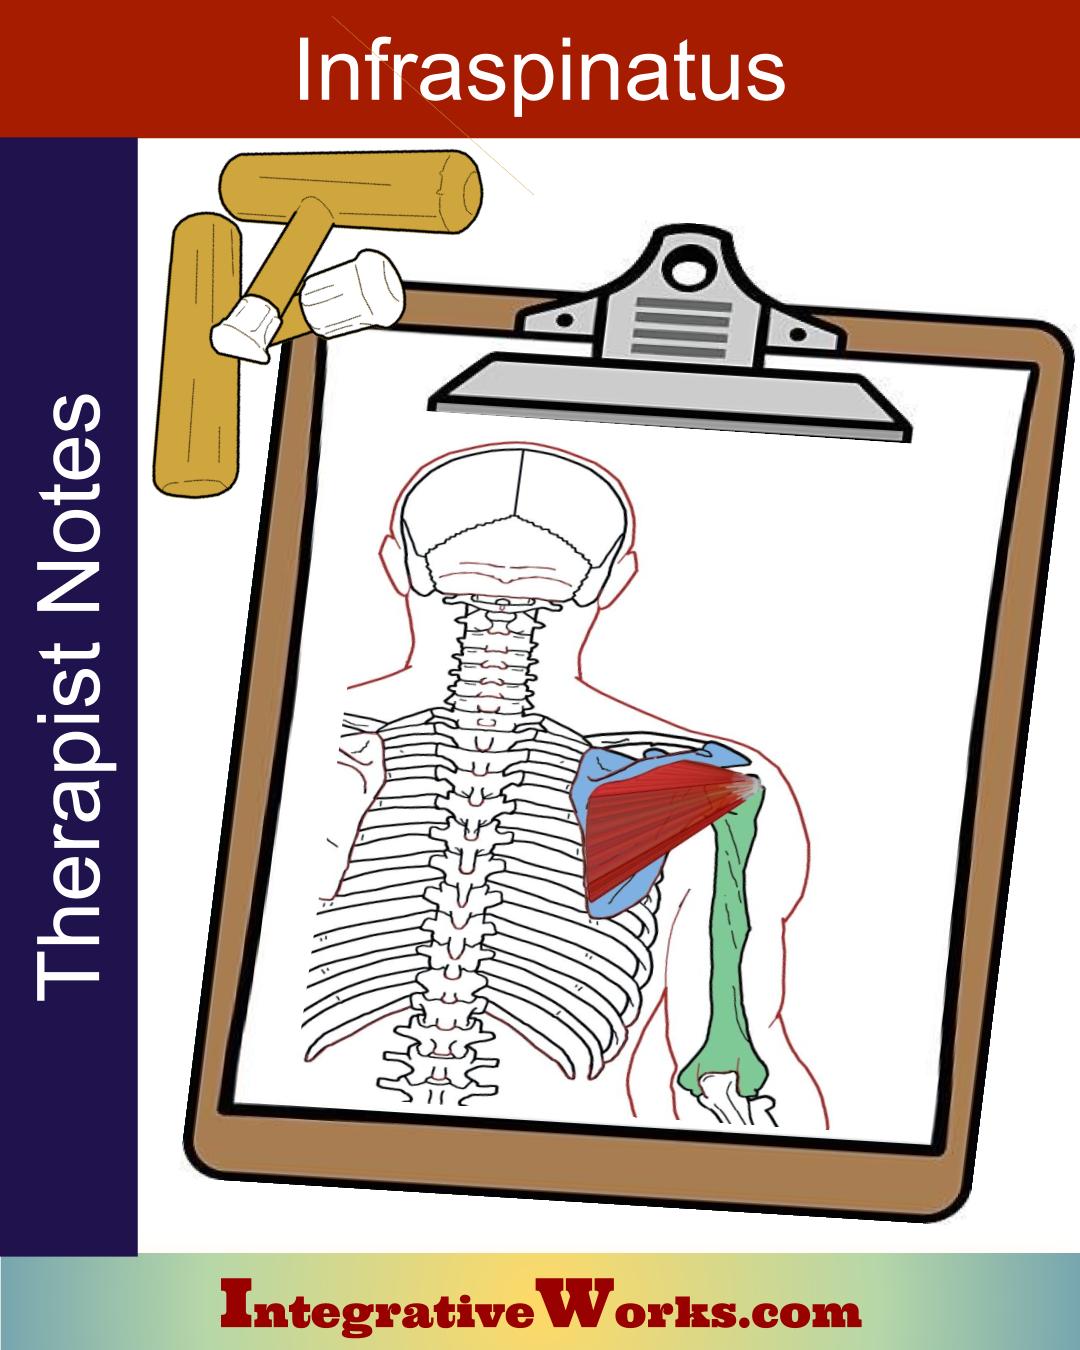 Infraspinatus – Massage Therapy Notes